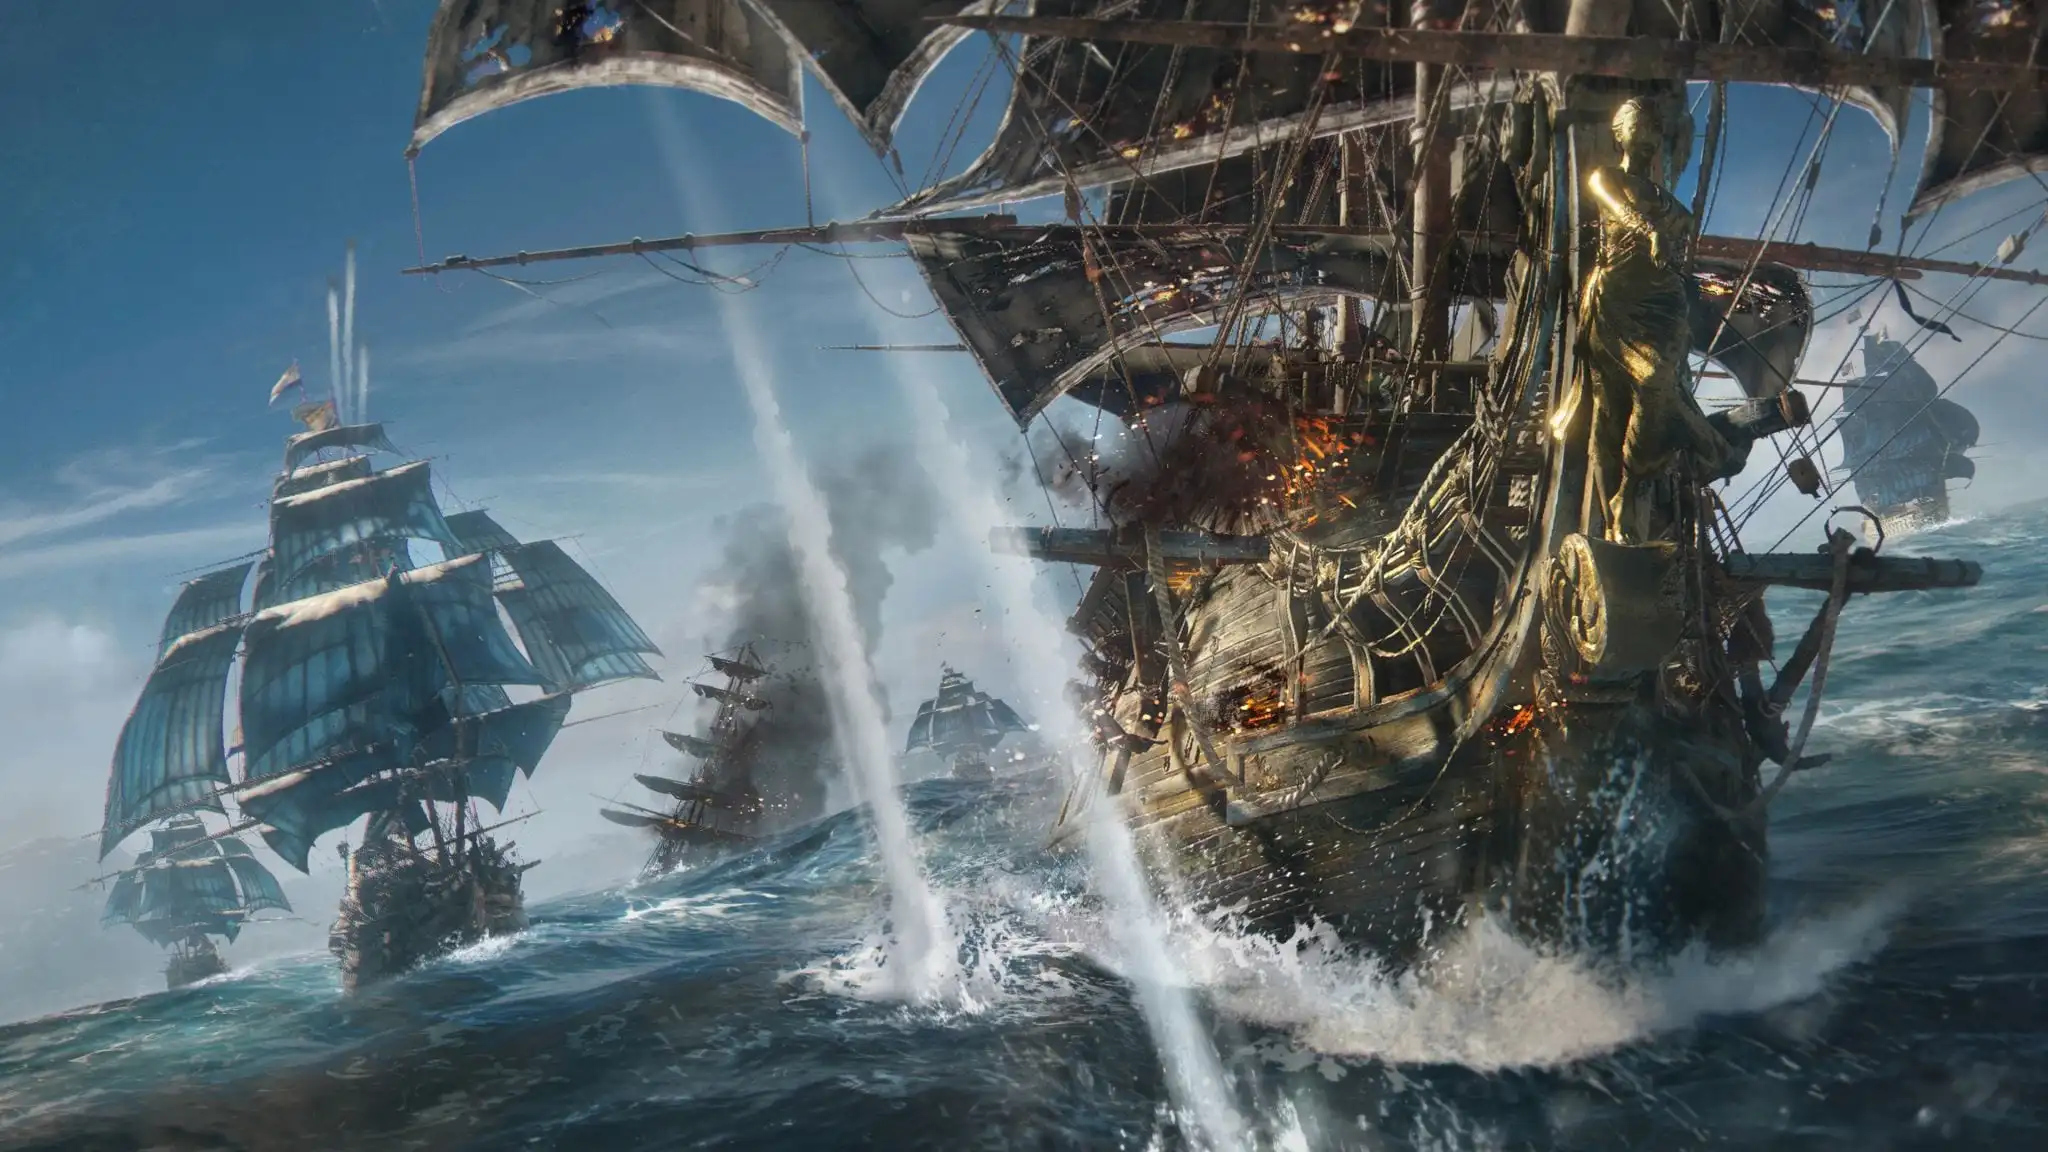 Ubisoft will finally show Skull and Bones gameplay this week